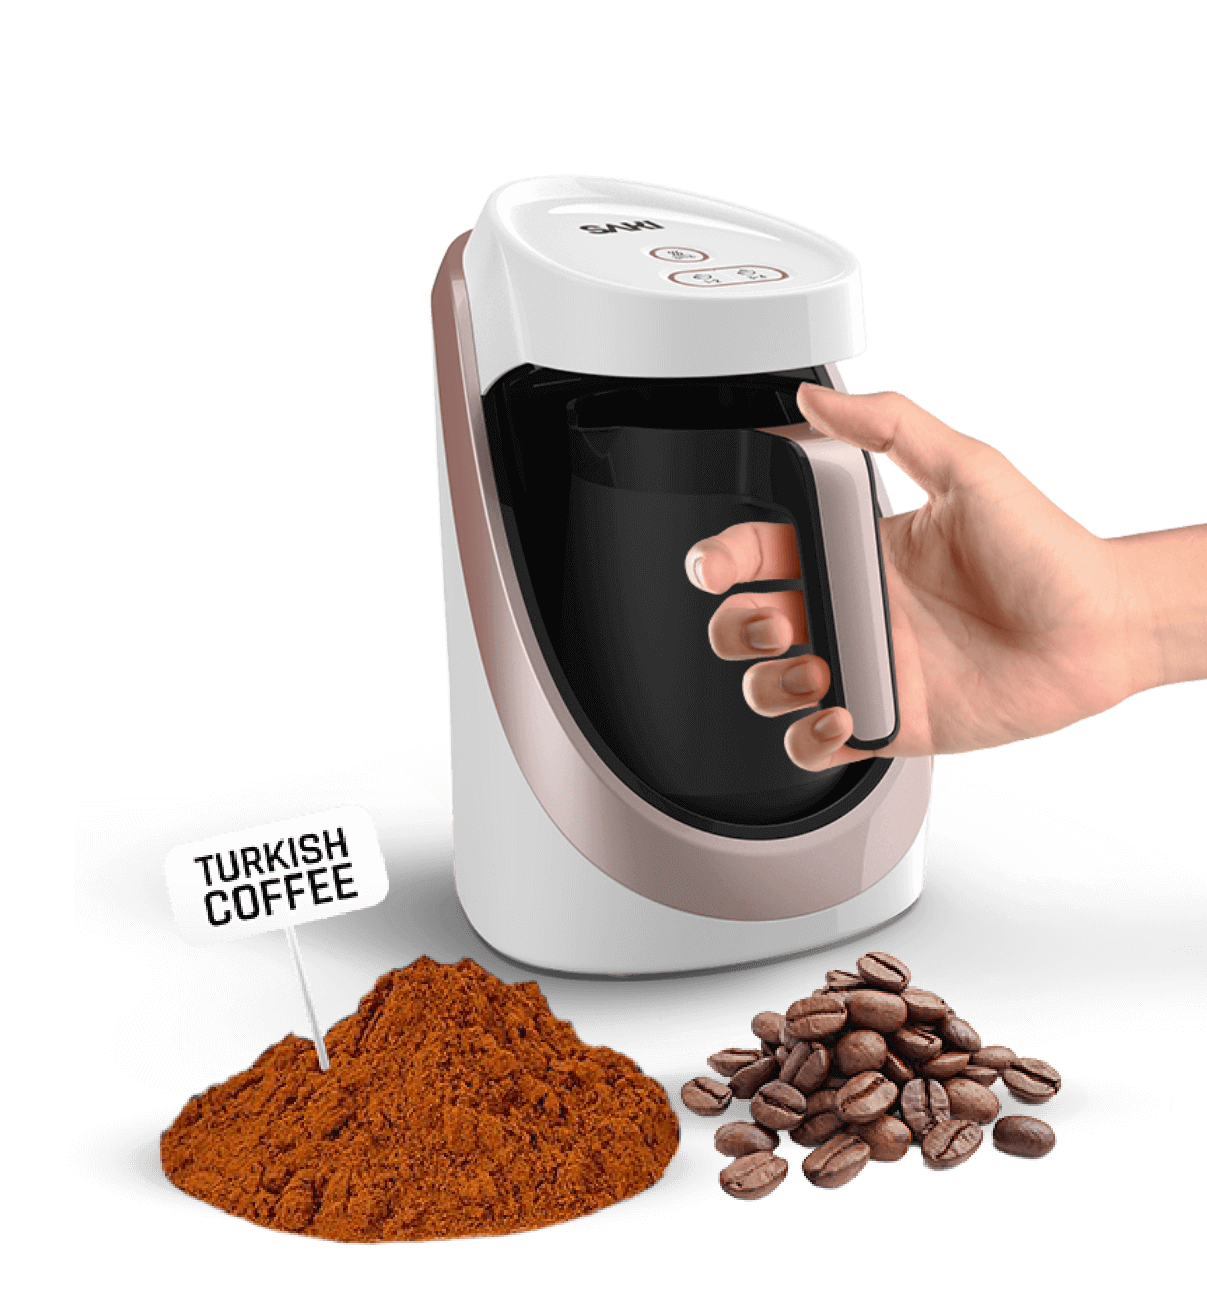 Premium Photo  Electric coffee maker for making turkish coffee coffee pot  coffee beans laid out in shape of heart